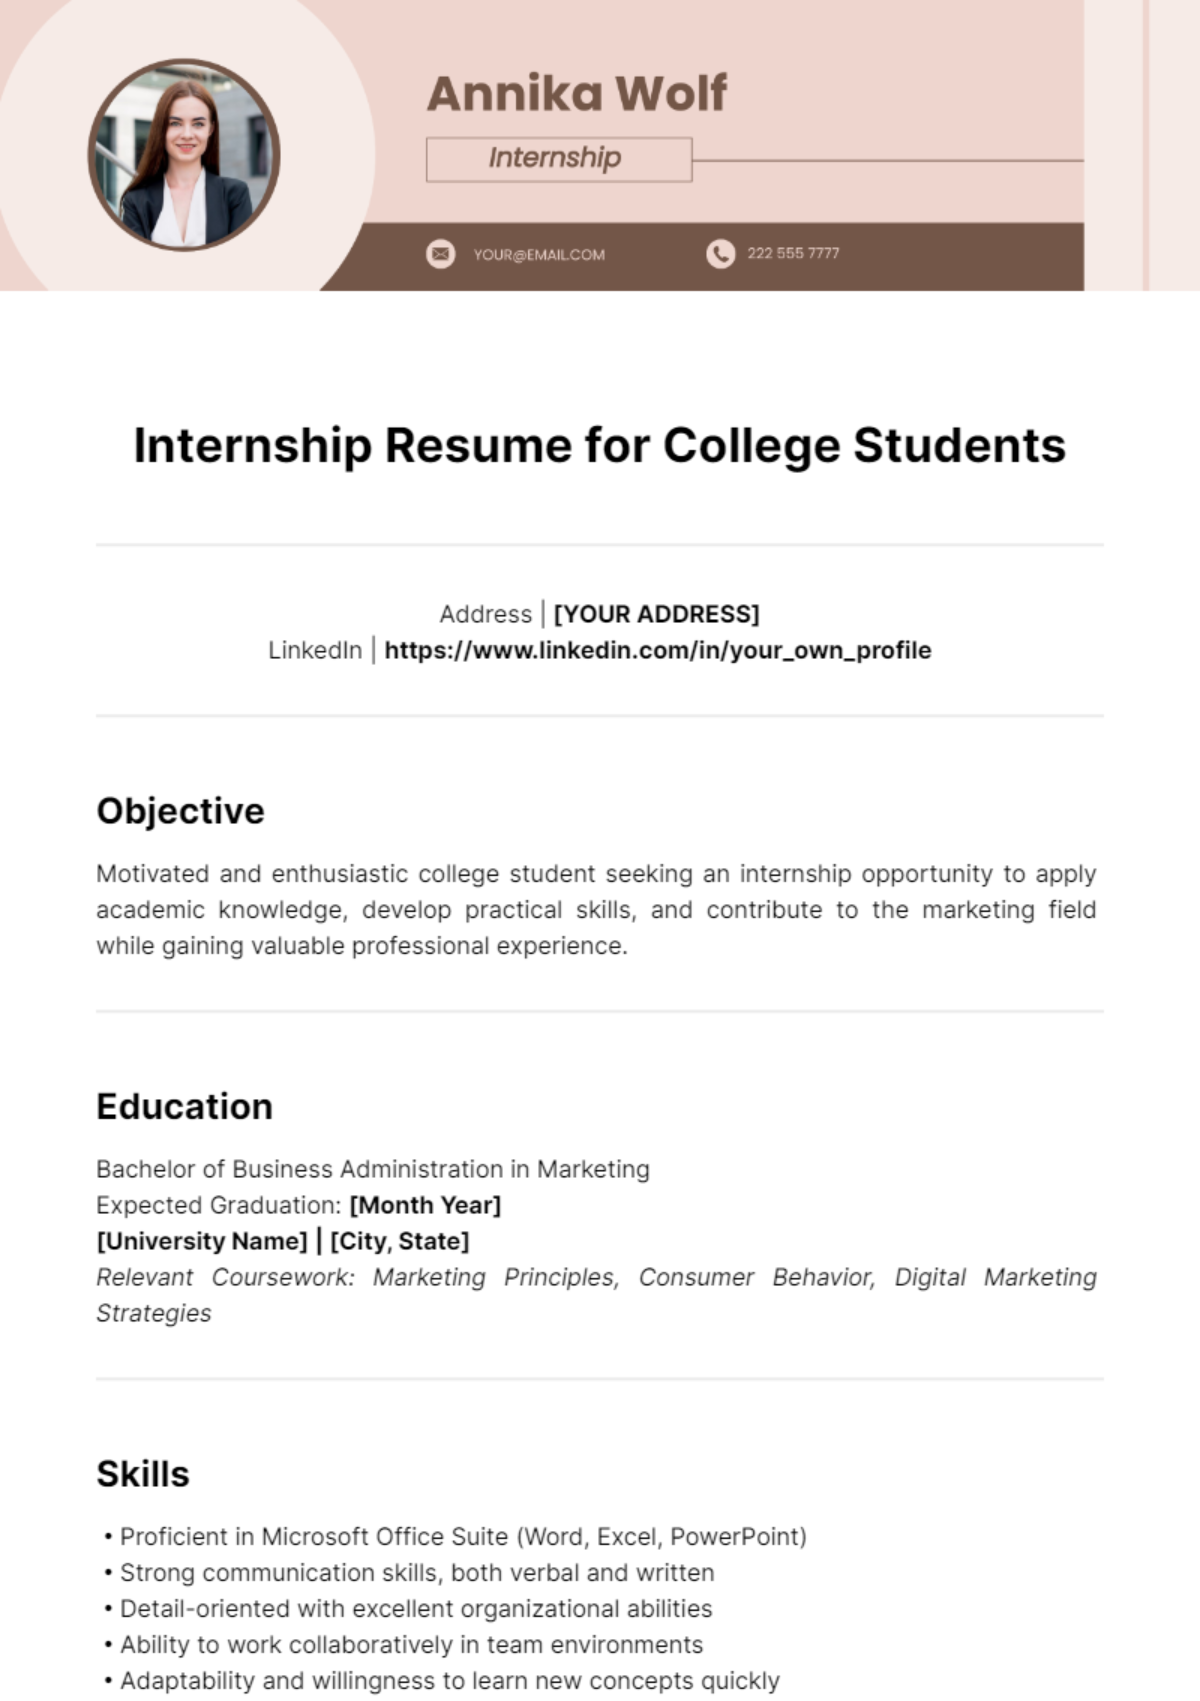 Internship Resume for College Students Template